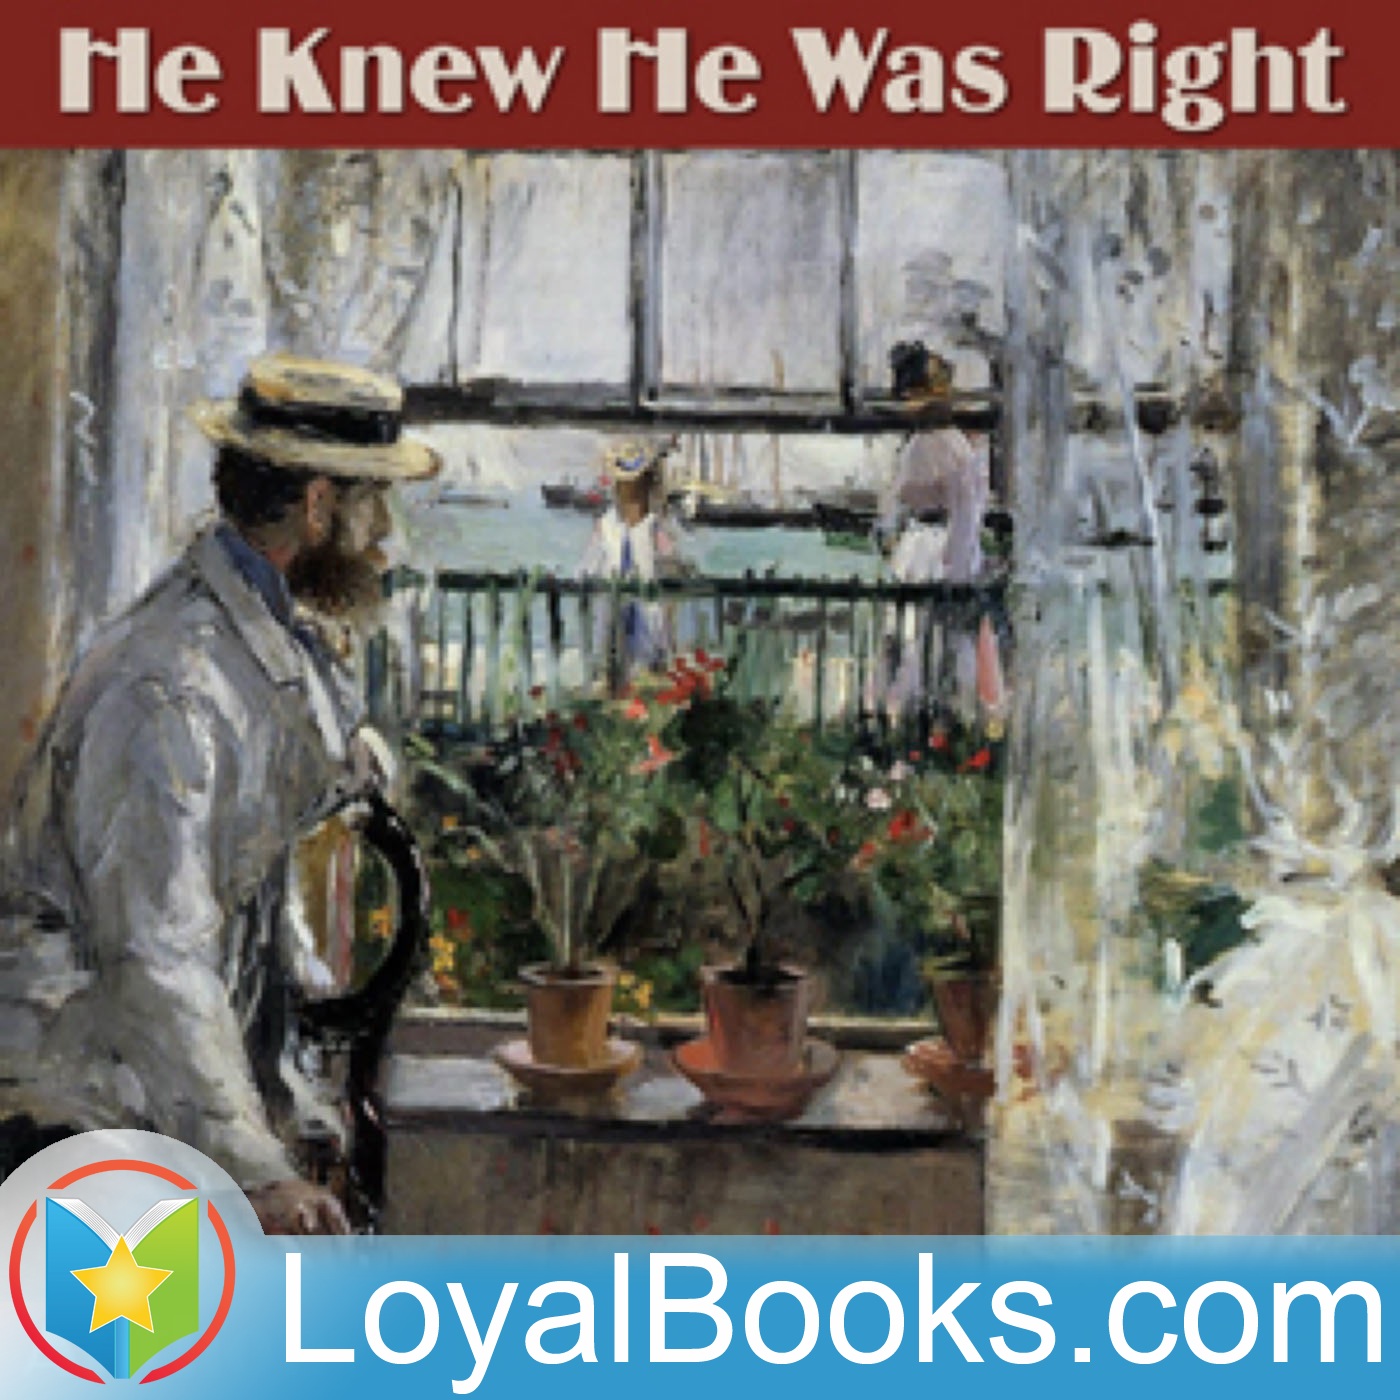 He Knew He Was Right by Anthony Trollope